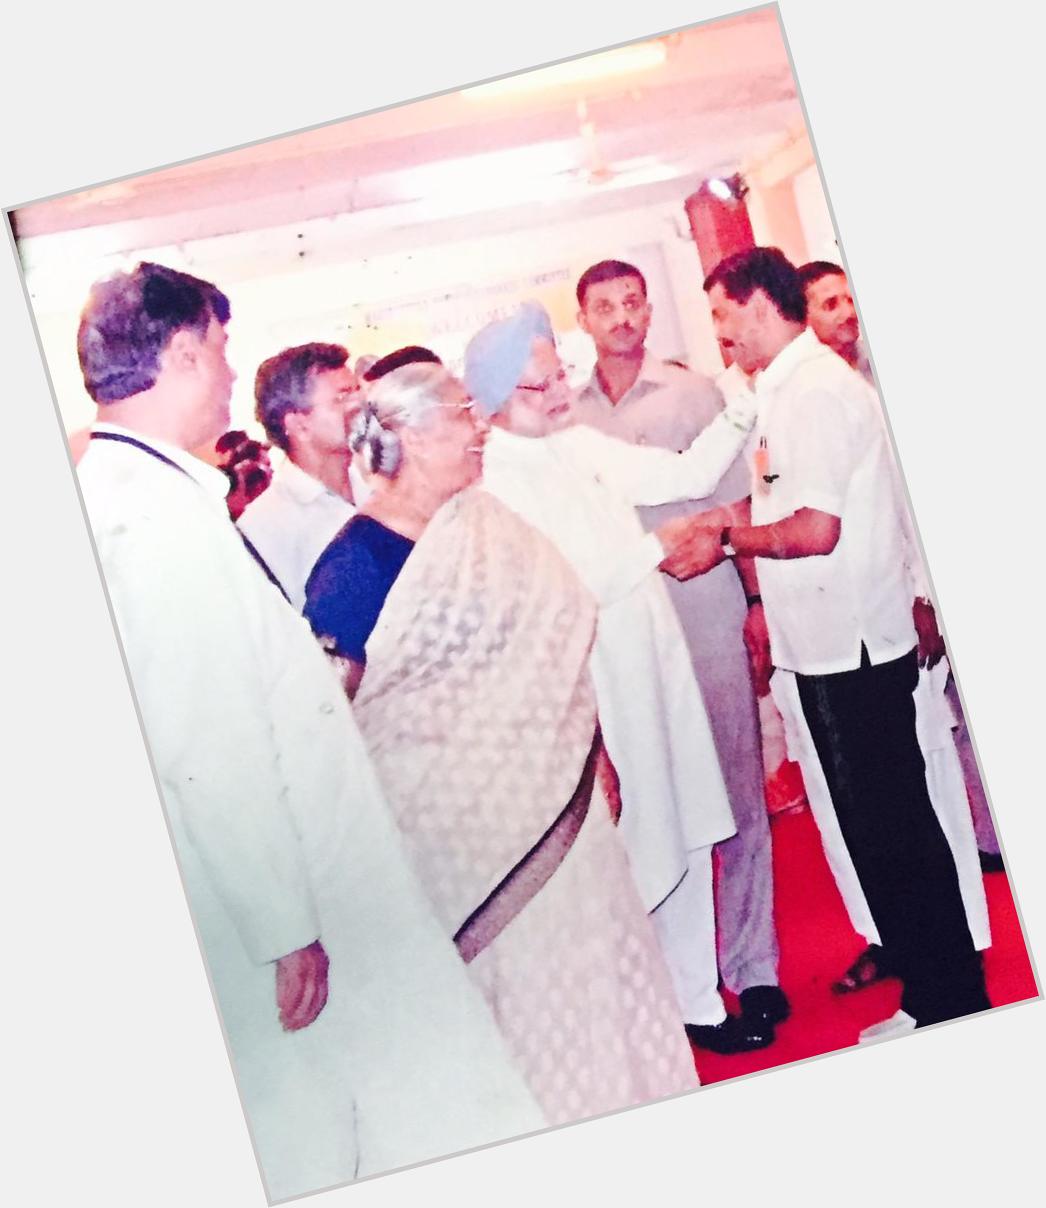 More than past 10 yrs memories with ex PM Manmohan Singh One of the finest PMs of the country,Happy birthday Sir  